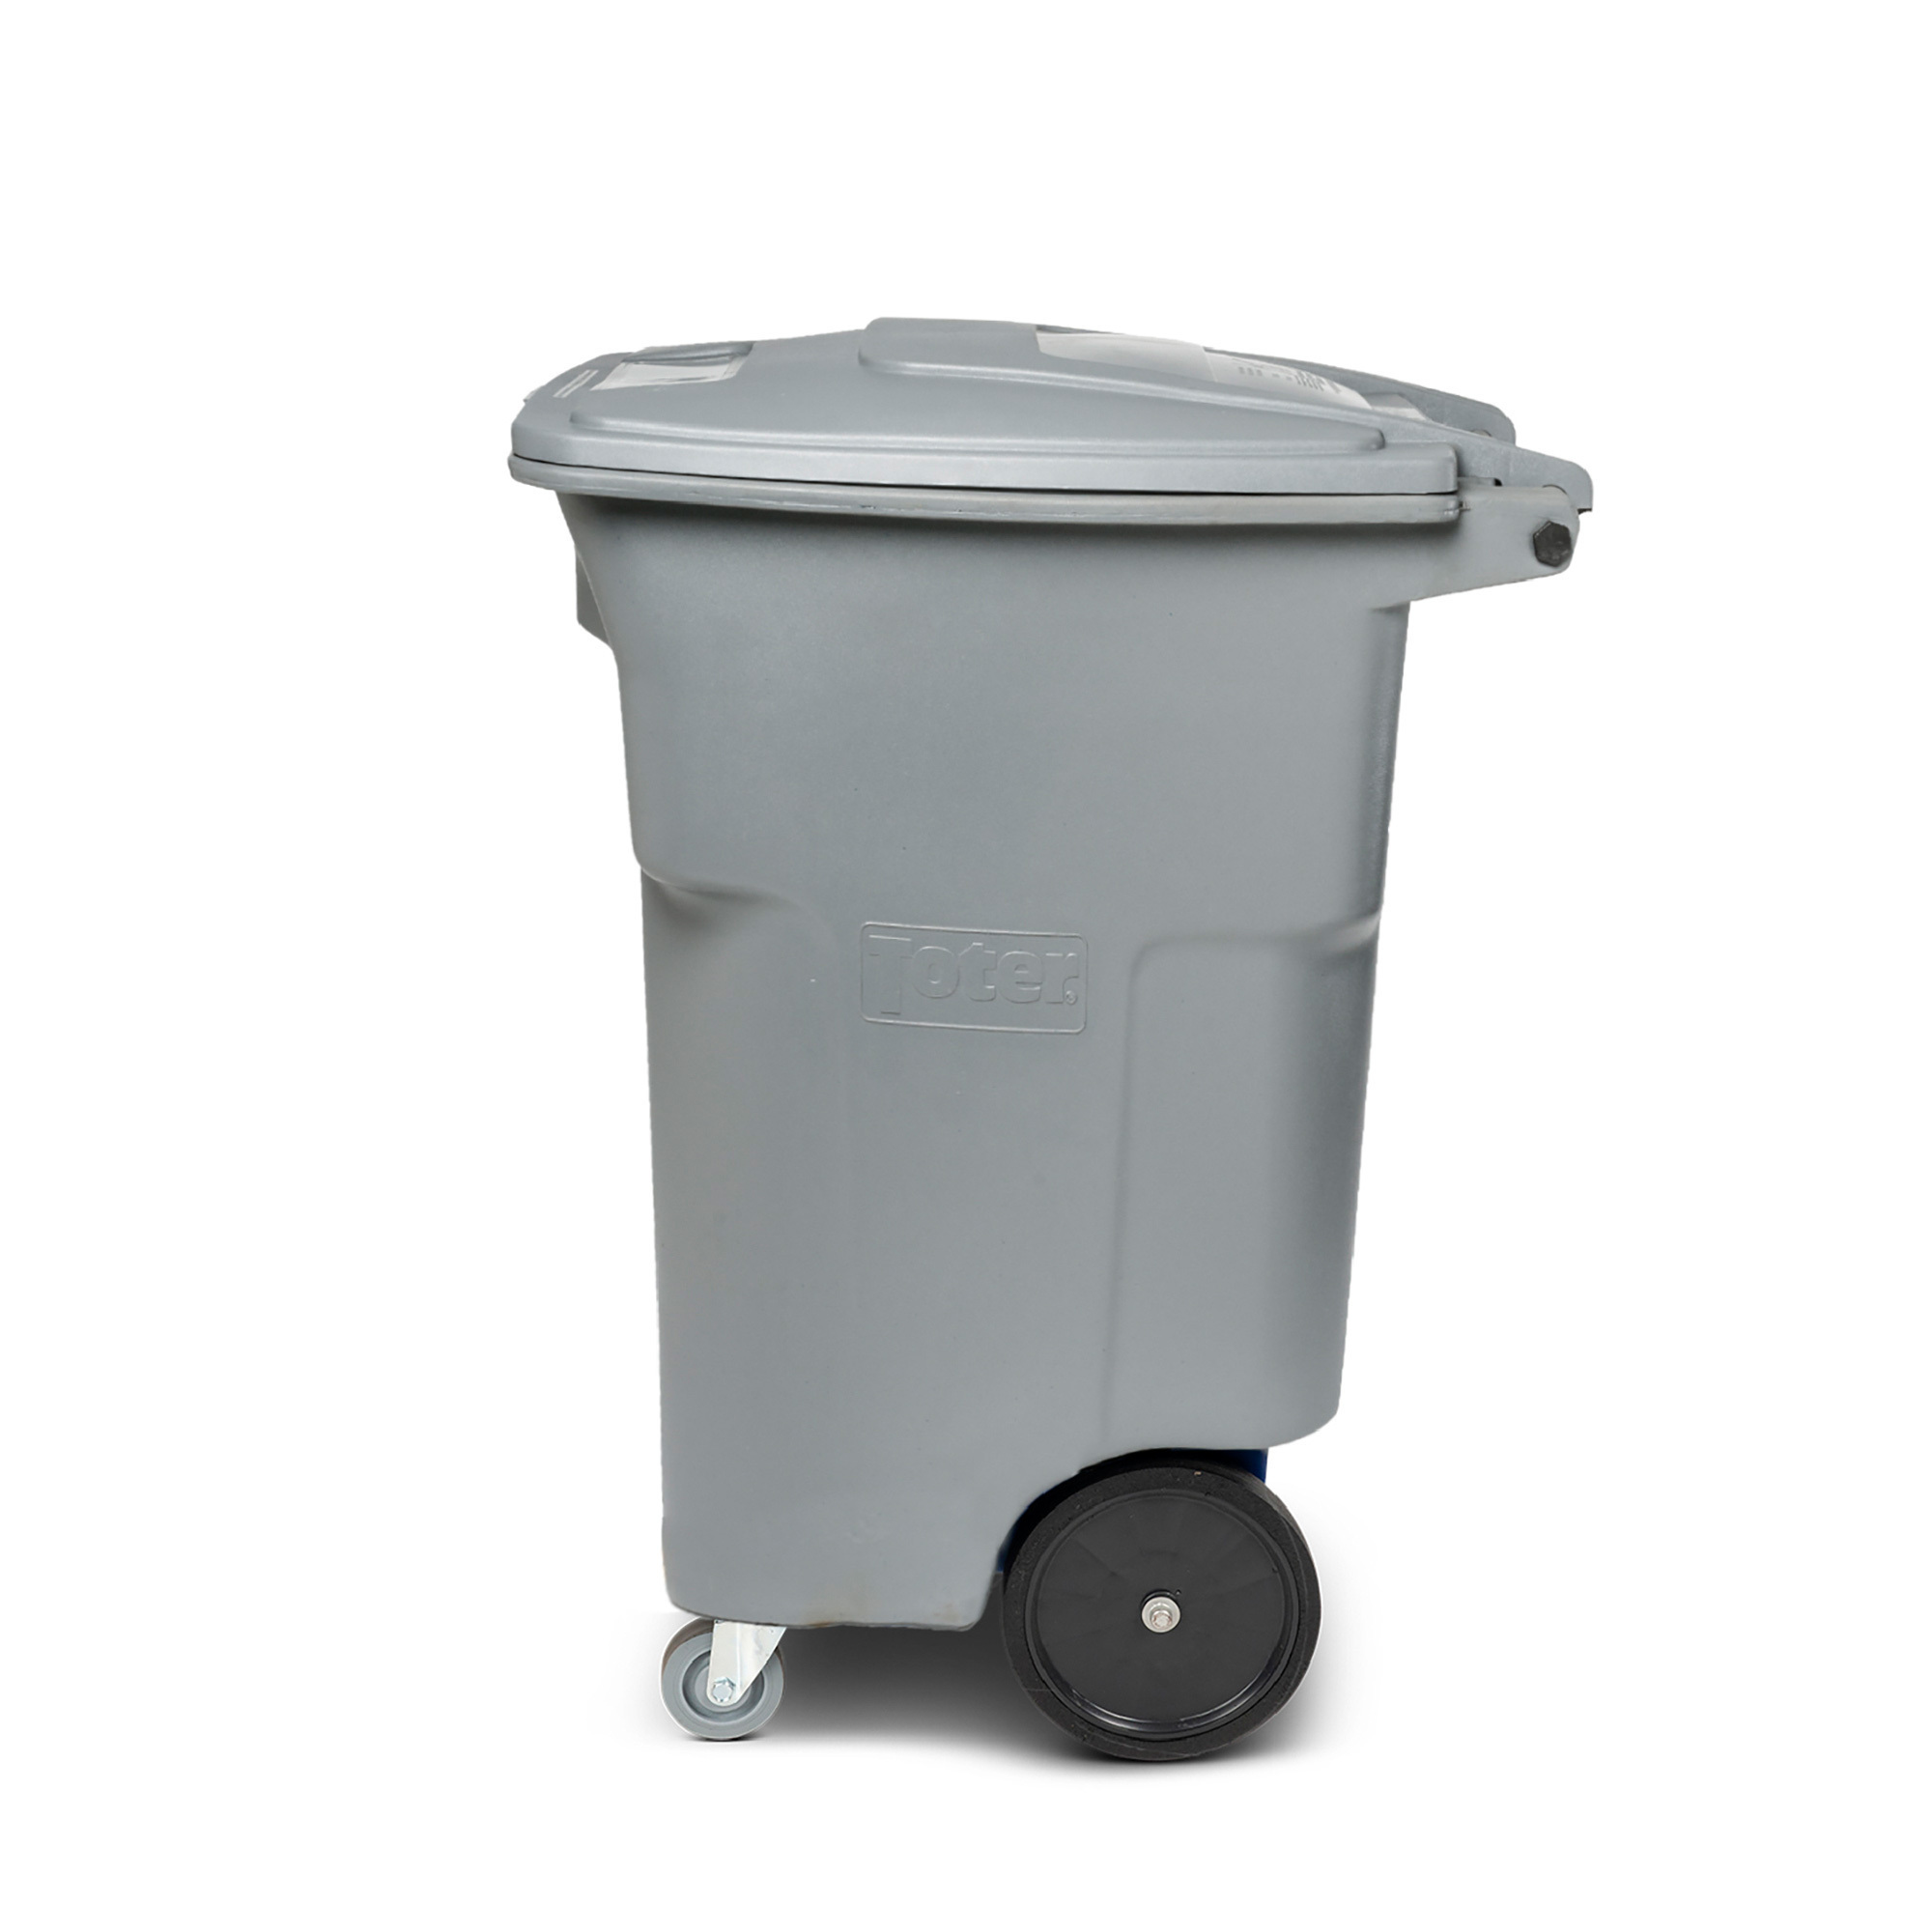 Viking Toter Classic Rollout Trash Can / Cart with Lid - 95 Gallon - Gray